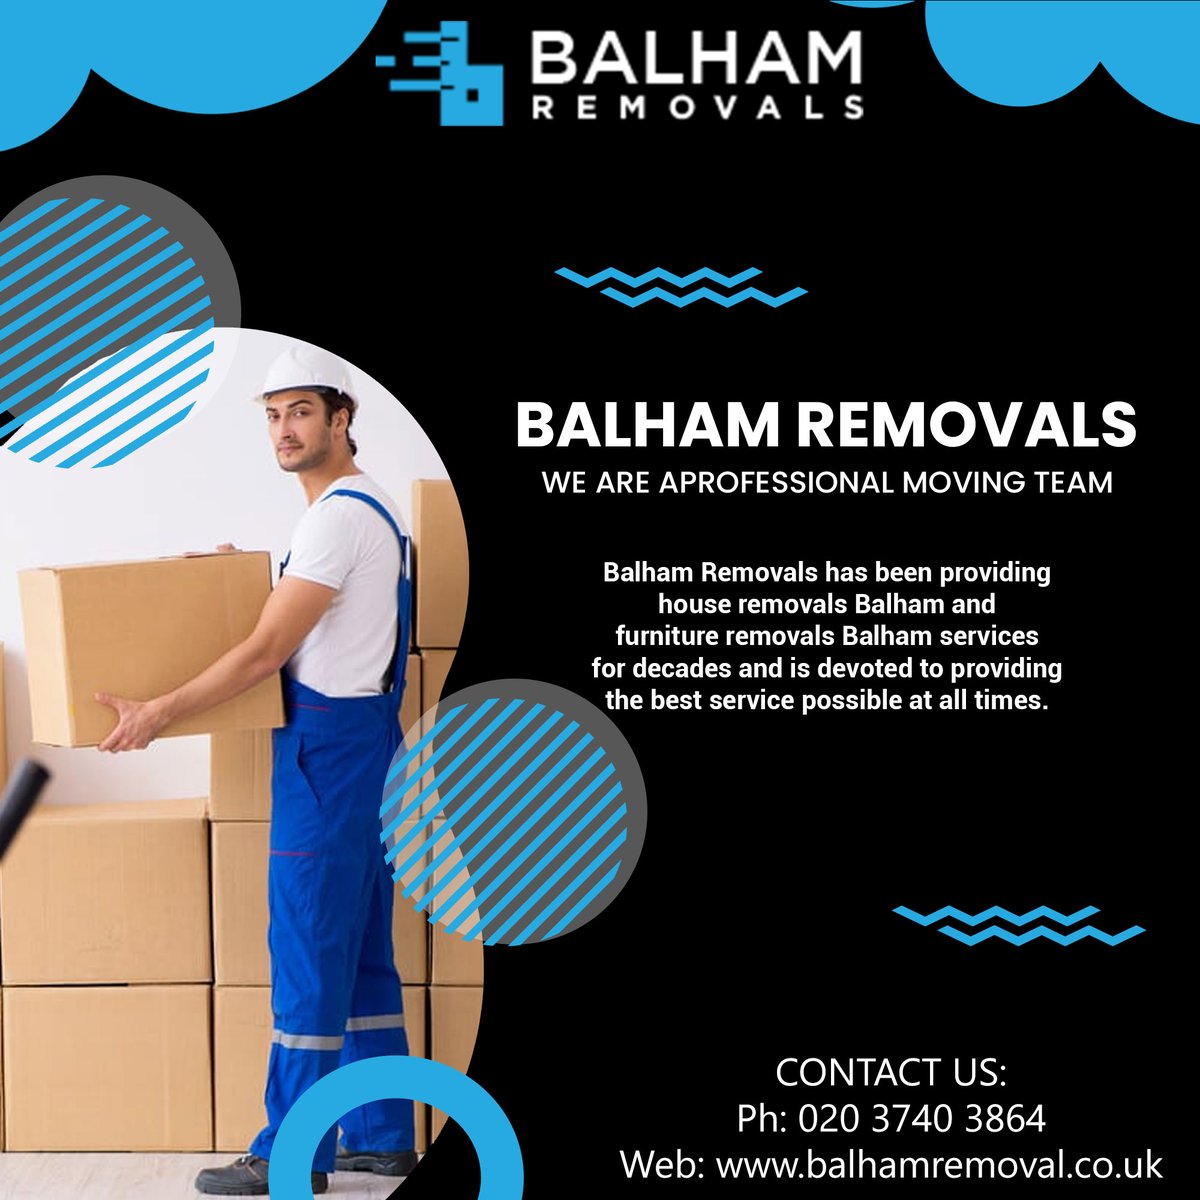 Are you moving?
Let's take the stress out of moving to our expert movers and packer.
call us: 02037403864 
balhamremoval.co.uk
.
#balhamremovals #balham #removals #removalservice #removalsandstorage #london #ukremovalscompany #houseremovals #OfficeRemovals #home #office